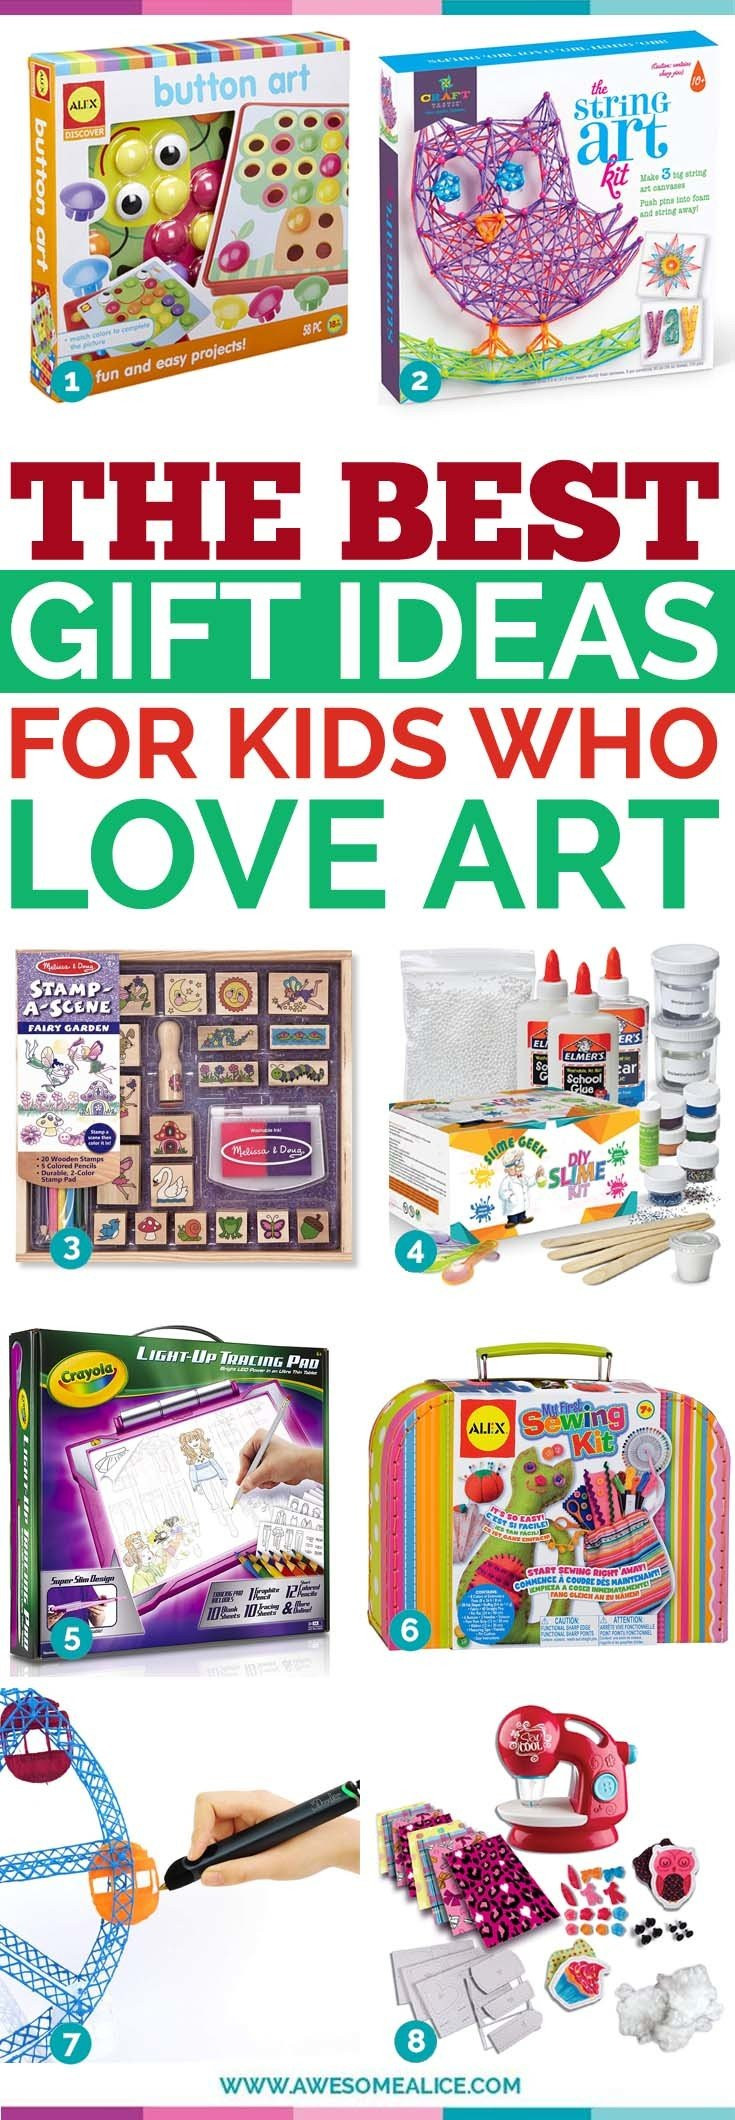 Creative Kids Gifts
 Top 30 Gift Ideas for Creative Kids Who Love Art